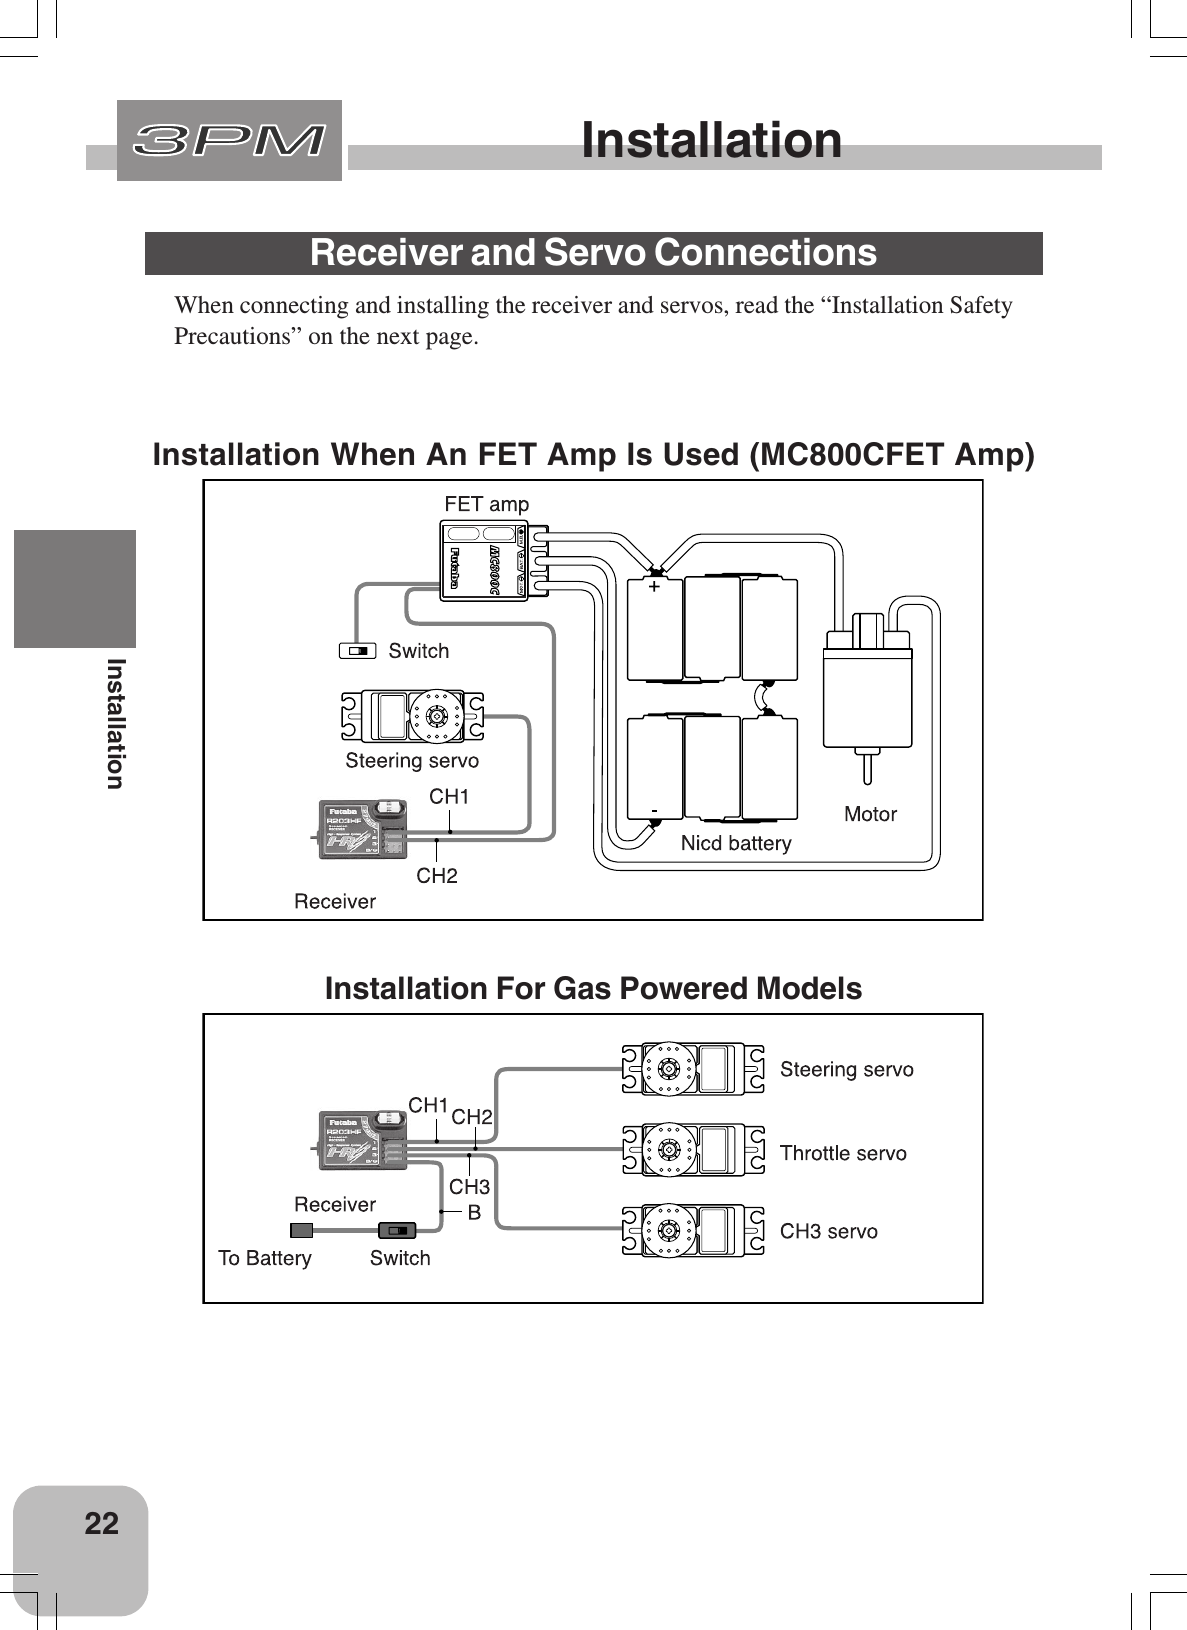 22InstallationInstallationReceiver and Servo ConnectionsInstallation When An FET Amp Is Used (MC800CFET Amp)When connecting and installing the receiver and servos, read the “Installation SafetyPrecautions” on the next page.Installation For Gas Powered Models